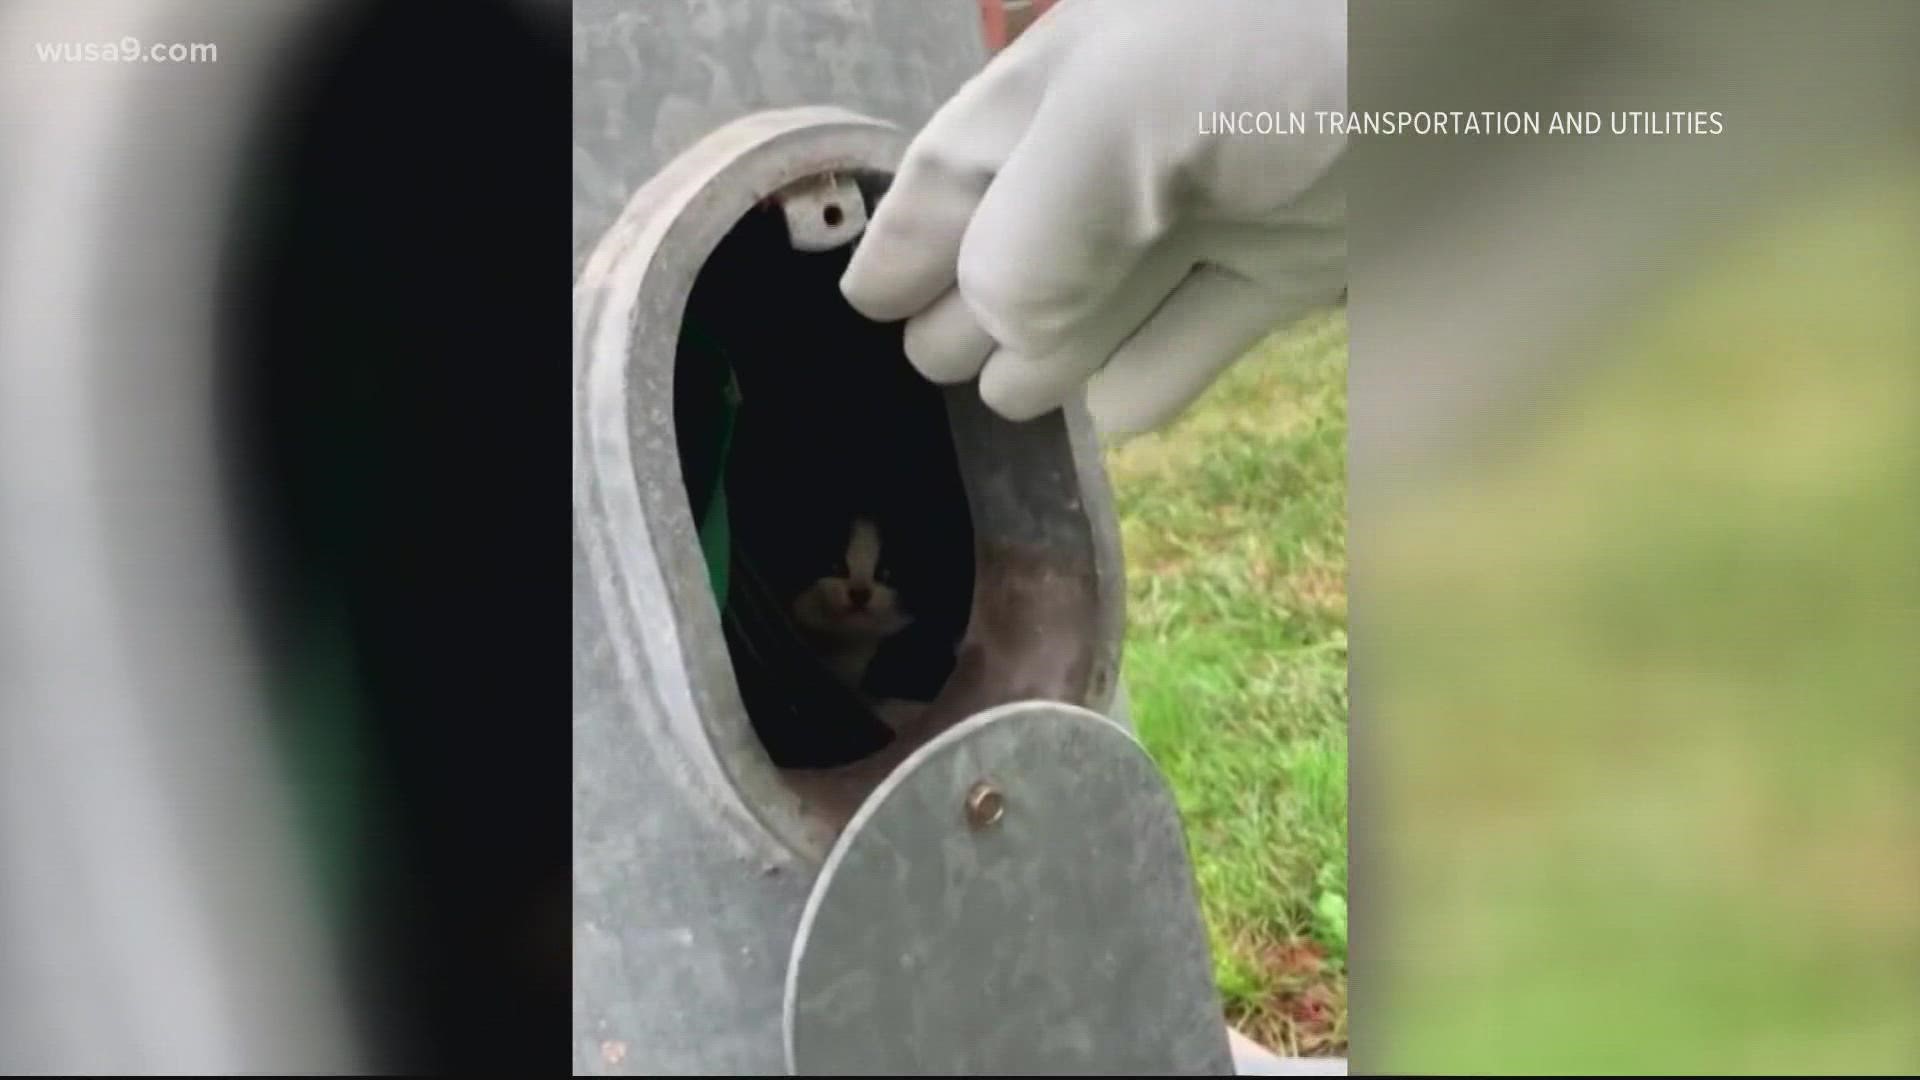 A kitten was rescued from light pole after members of the community heard his cries for help. Crews were able to safely get the kitten out and he is now safe.